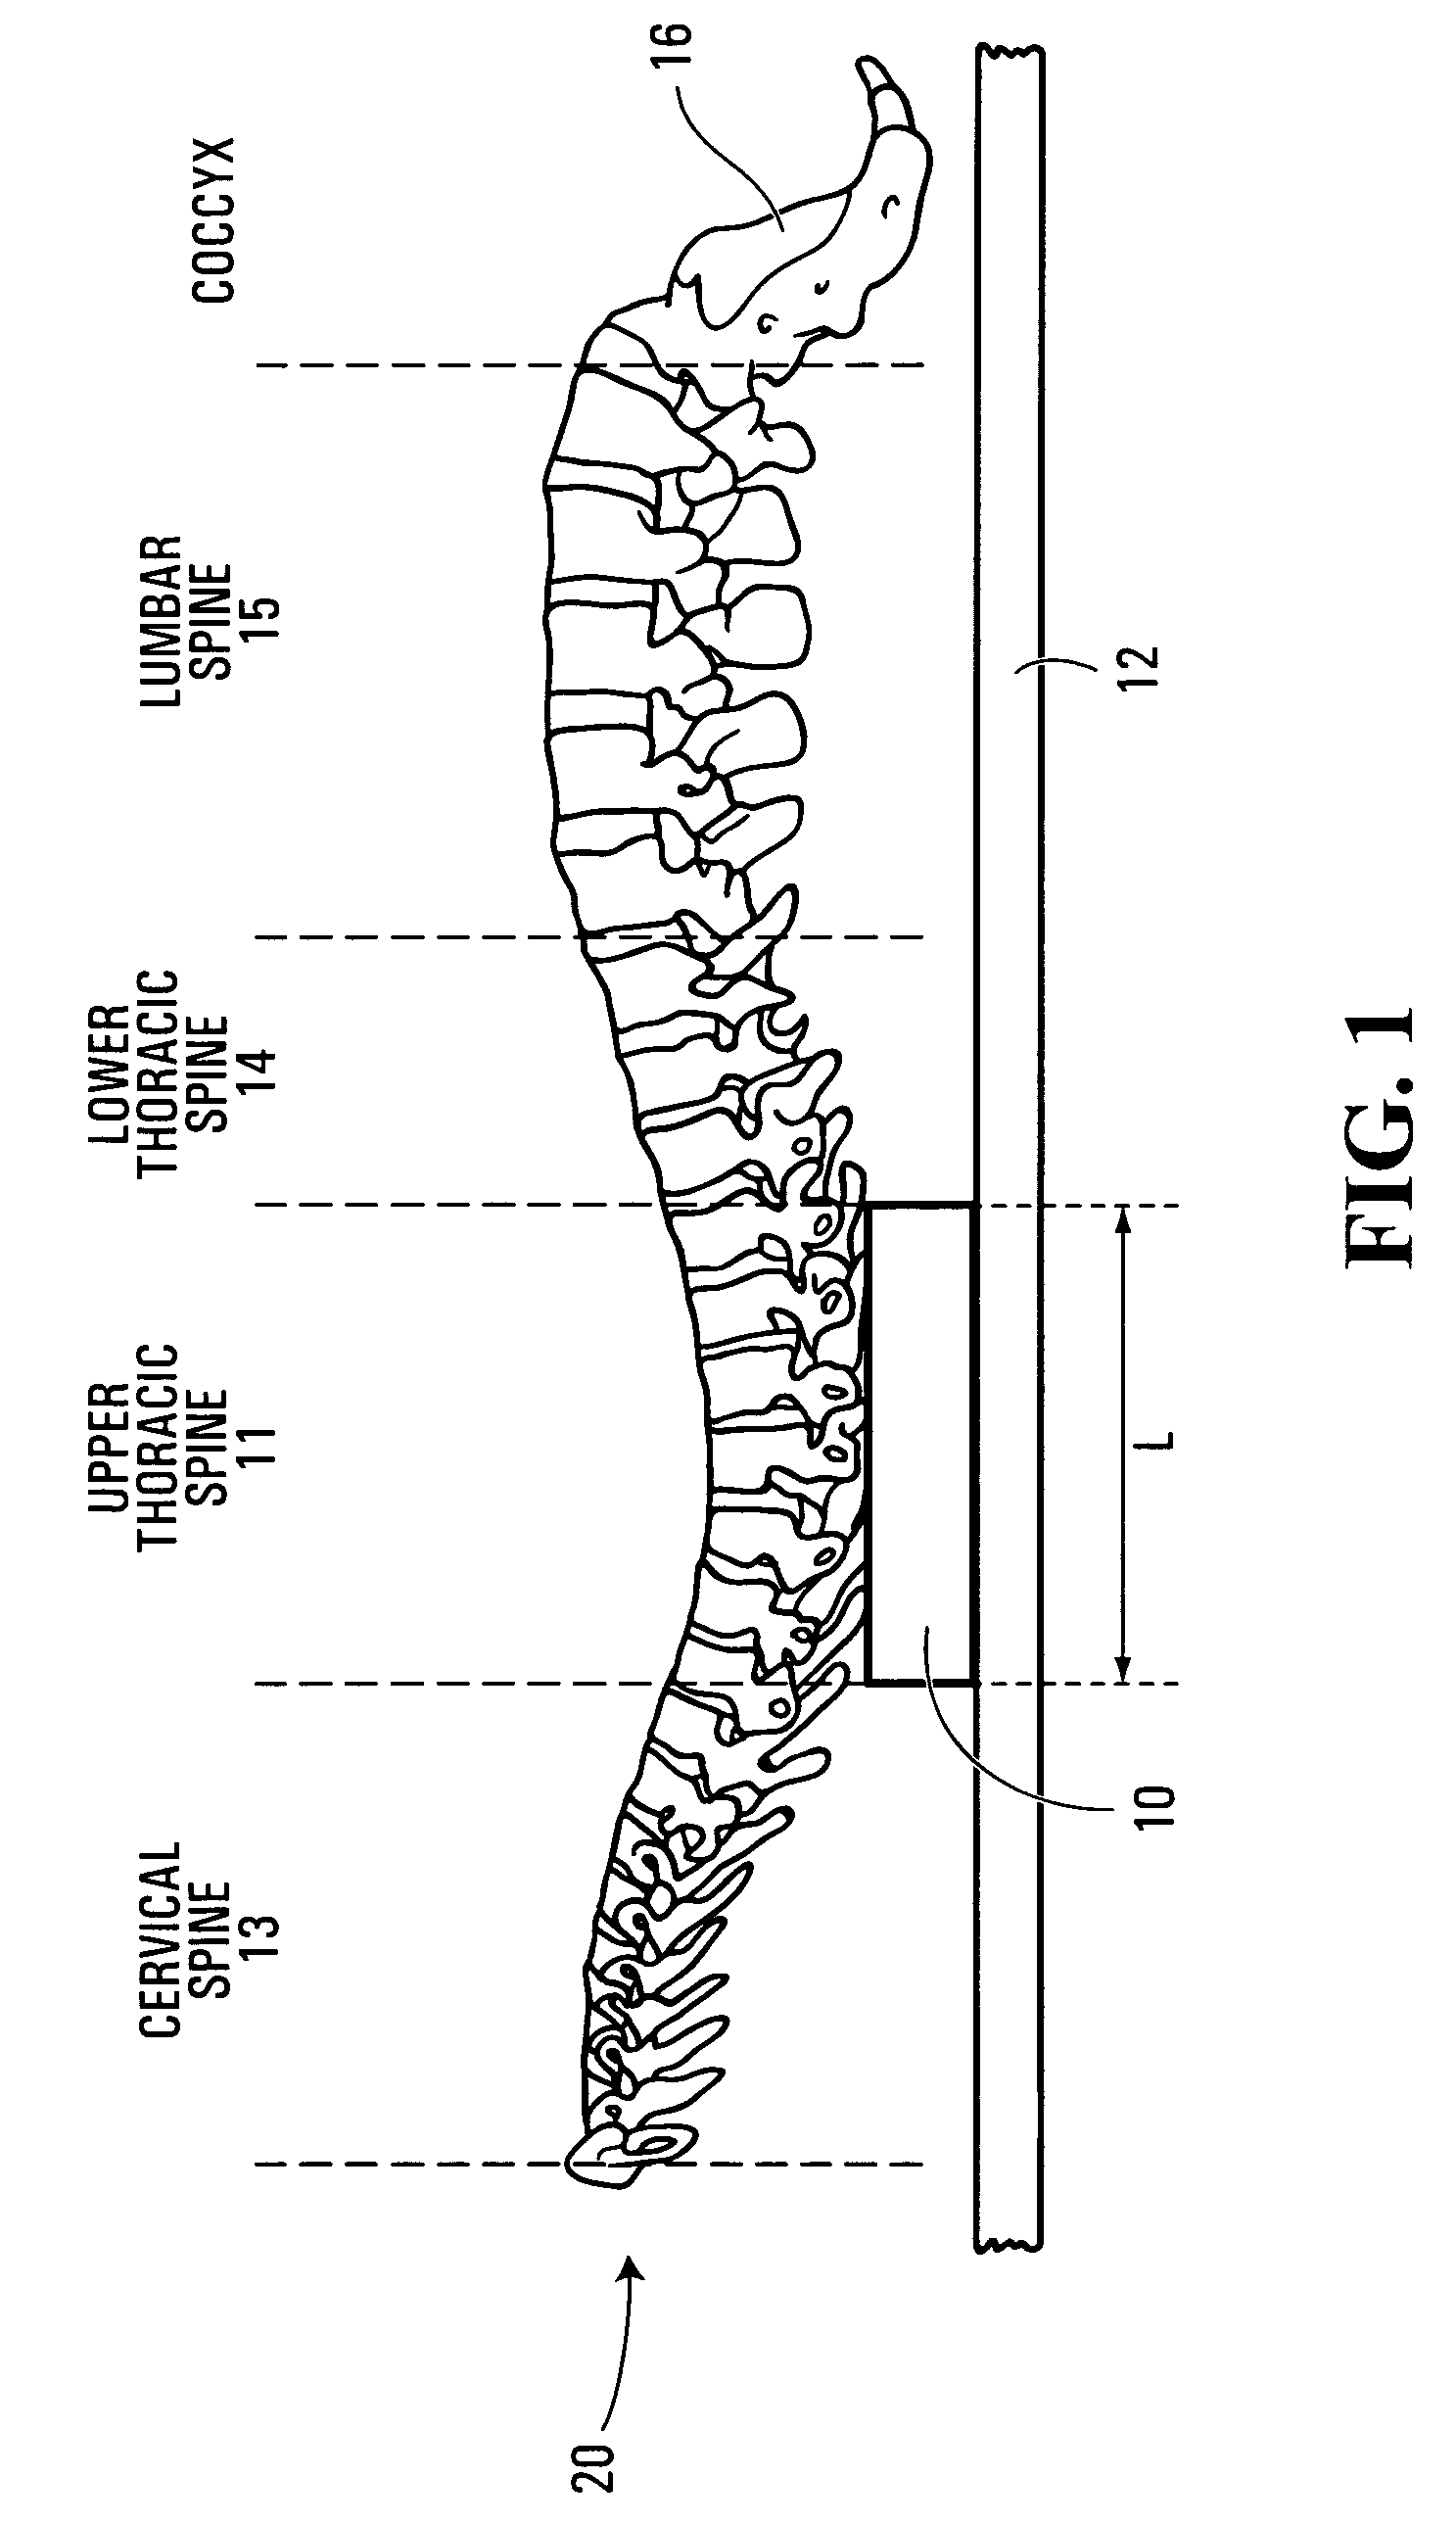 Device for correcting thoracic spine positioning